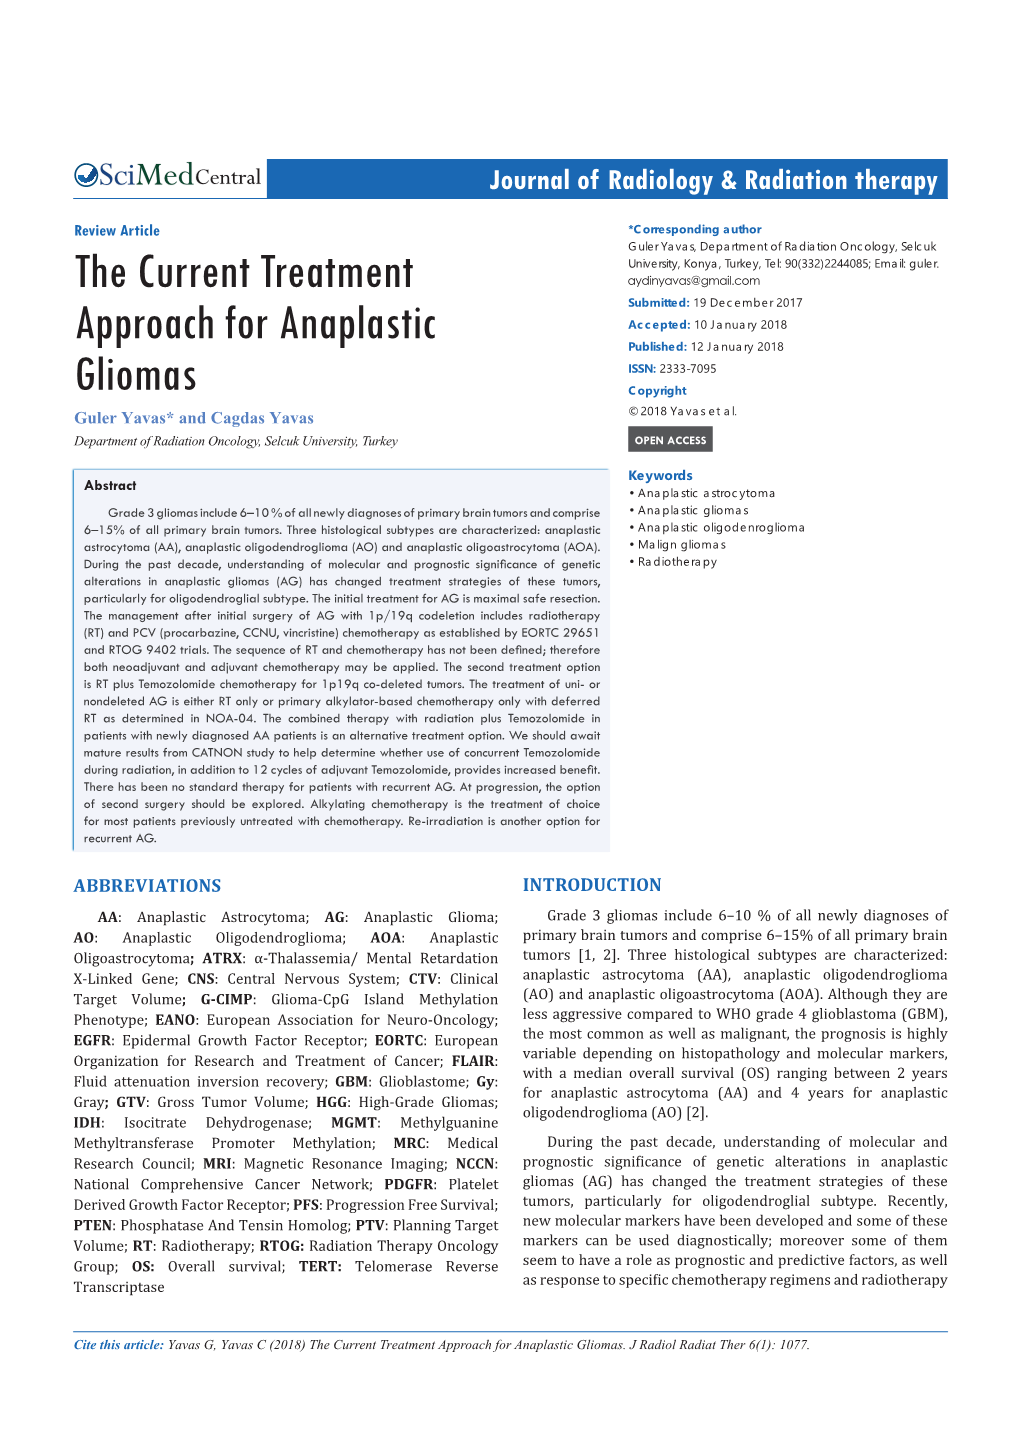 The Current Treatment Approach for Anaplastic Gliomas